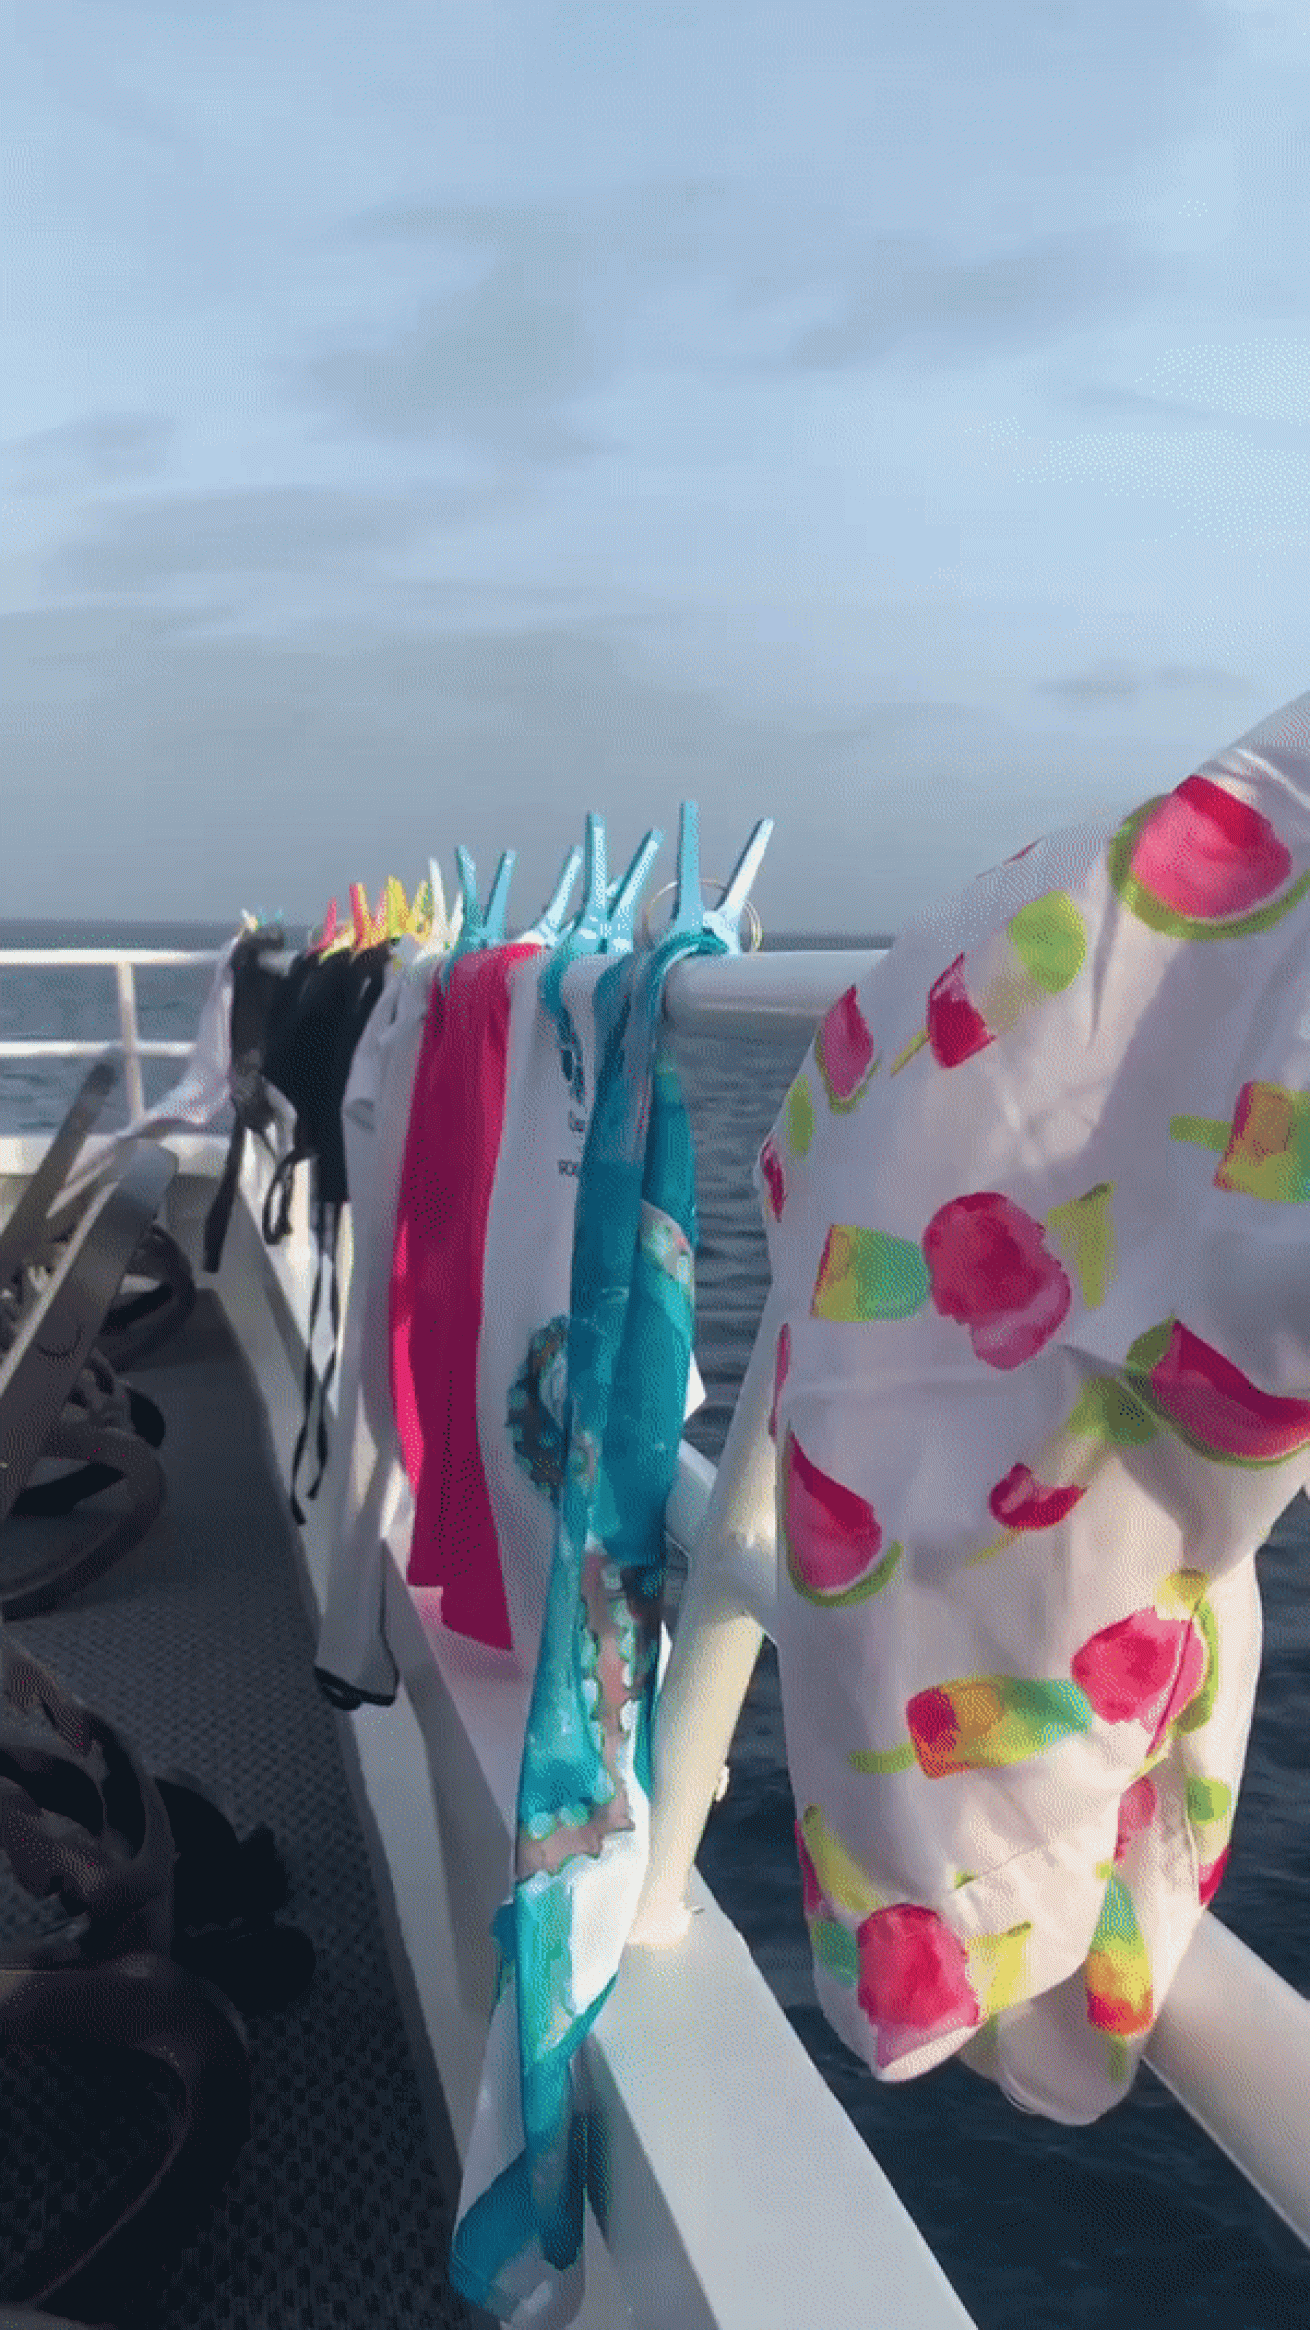 Swimsuits drying